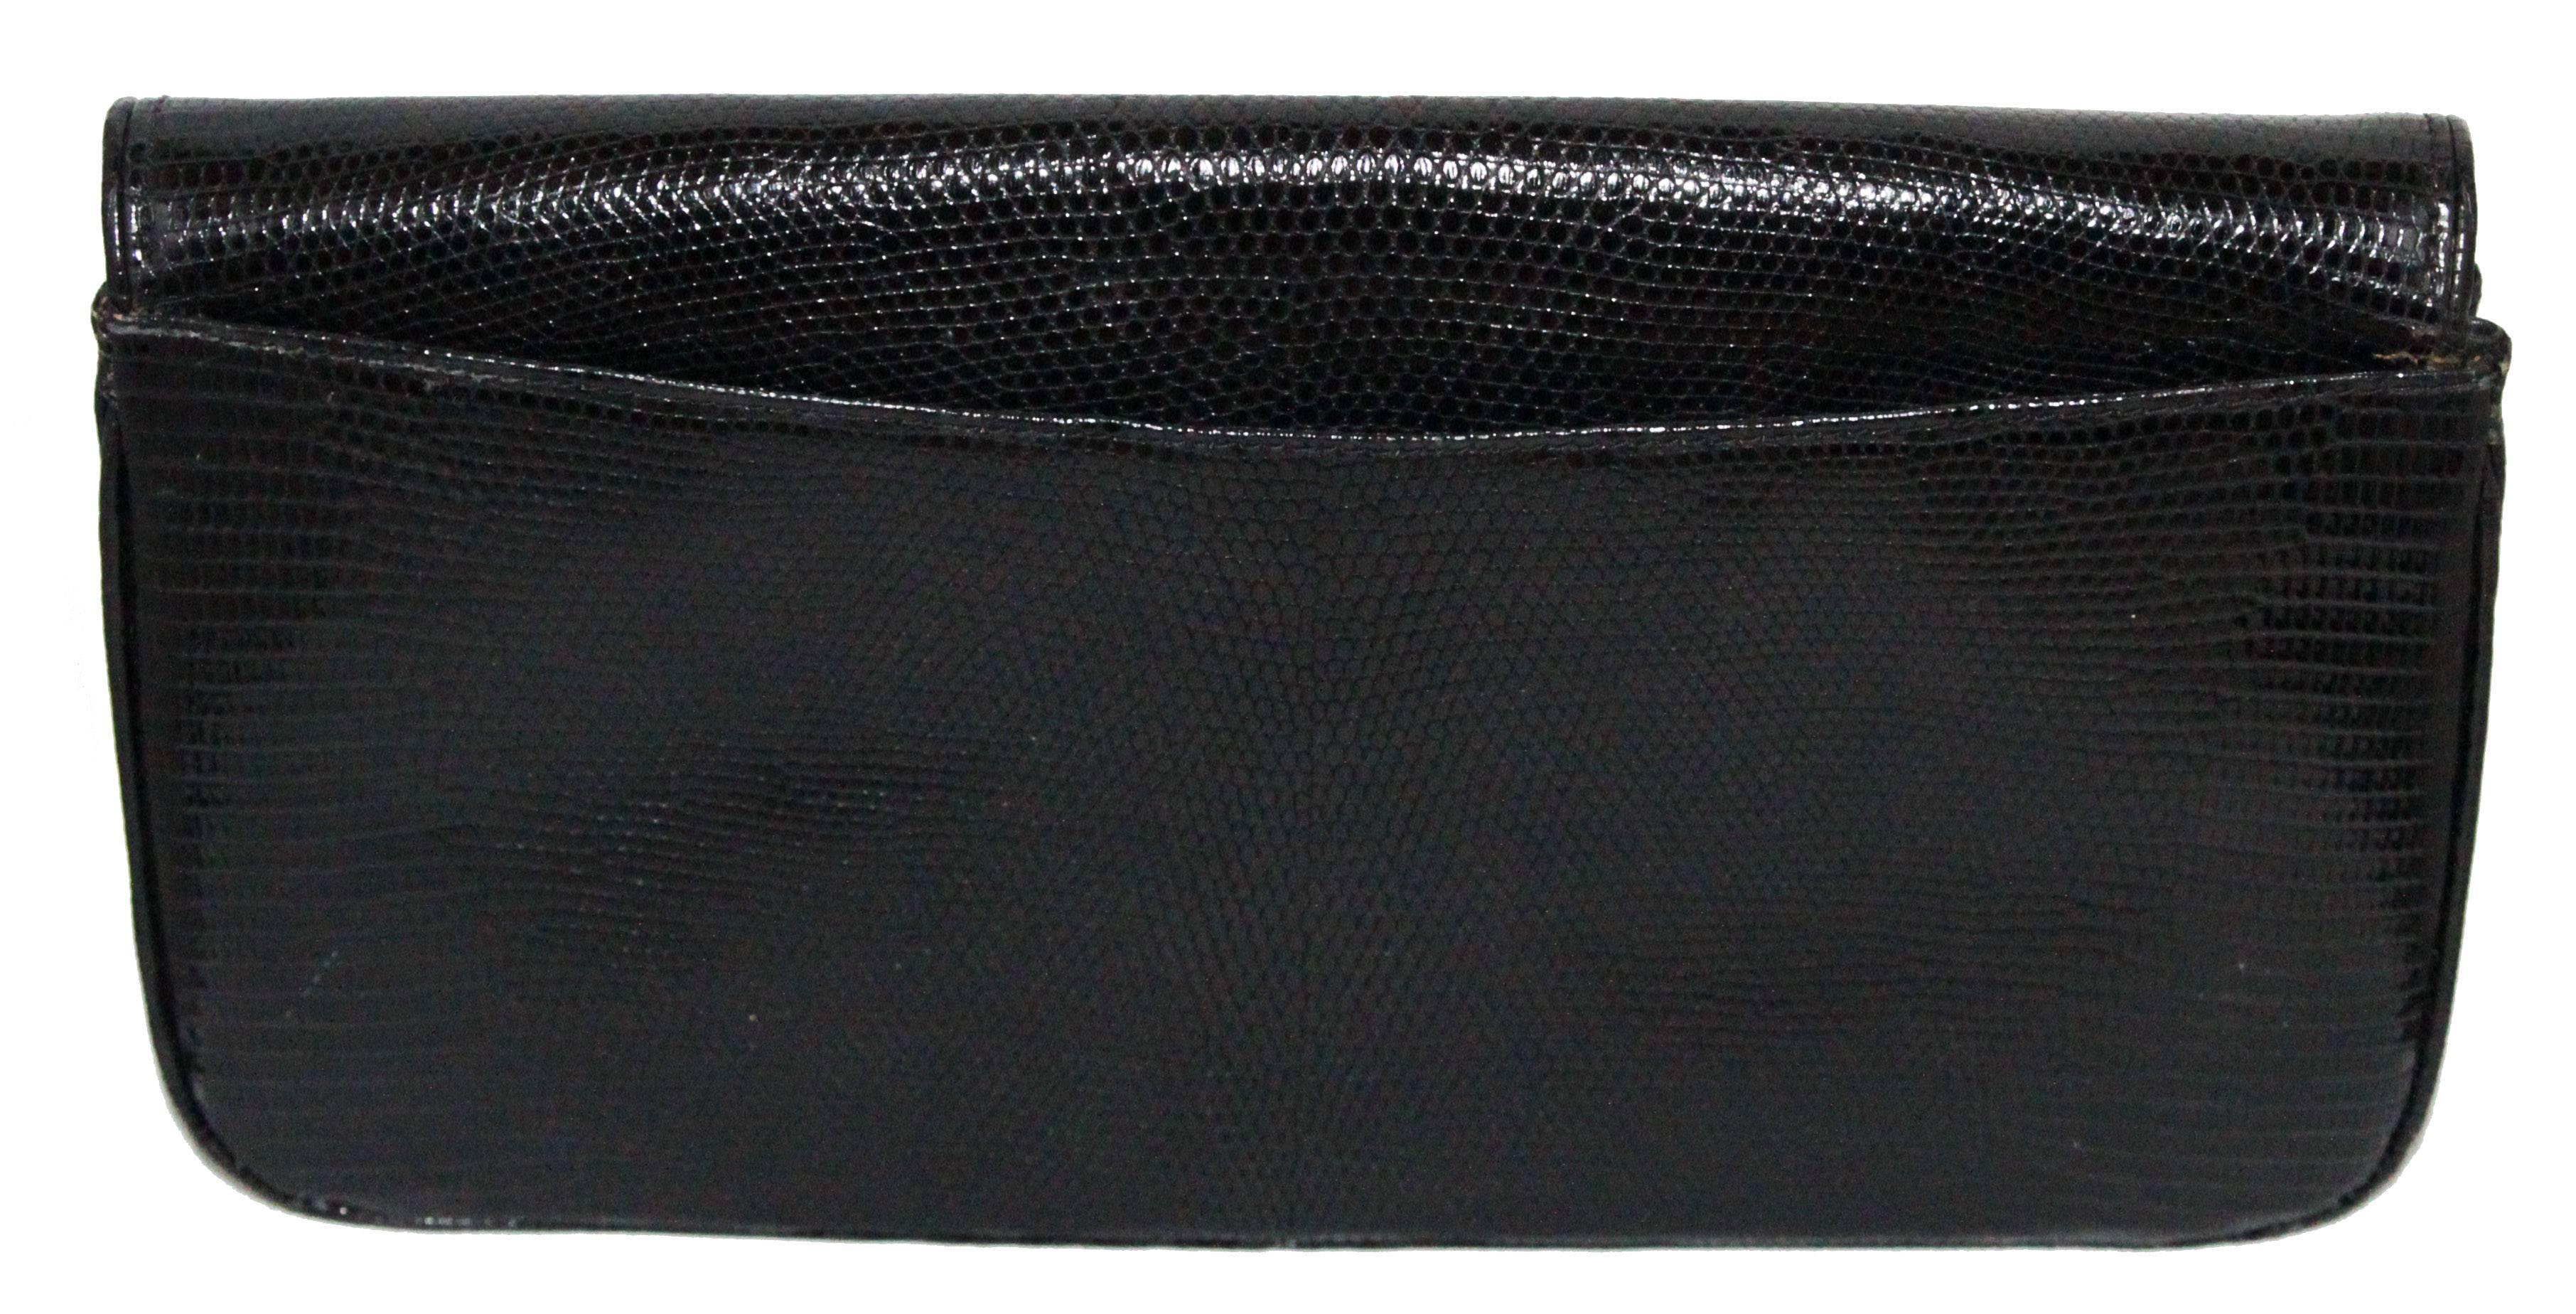 Exceptional large Gucci black lizard clutch of the 80s. Perfect style and collectable. Gorgeous lizard quality. Black leather lining. No shoulder strap. 

Marked : Gucci

Size : 32 x 17 x 4 cm - 12.6 x 6.7 x 1.6 in.  

Excellent vintage